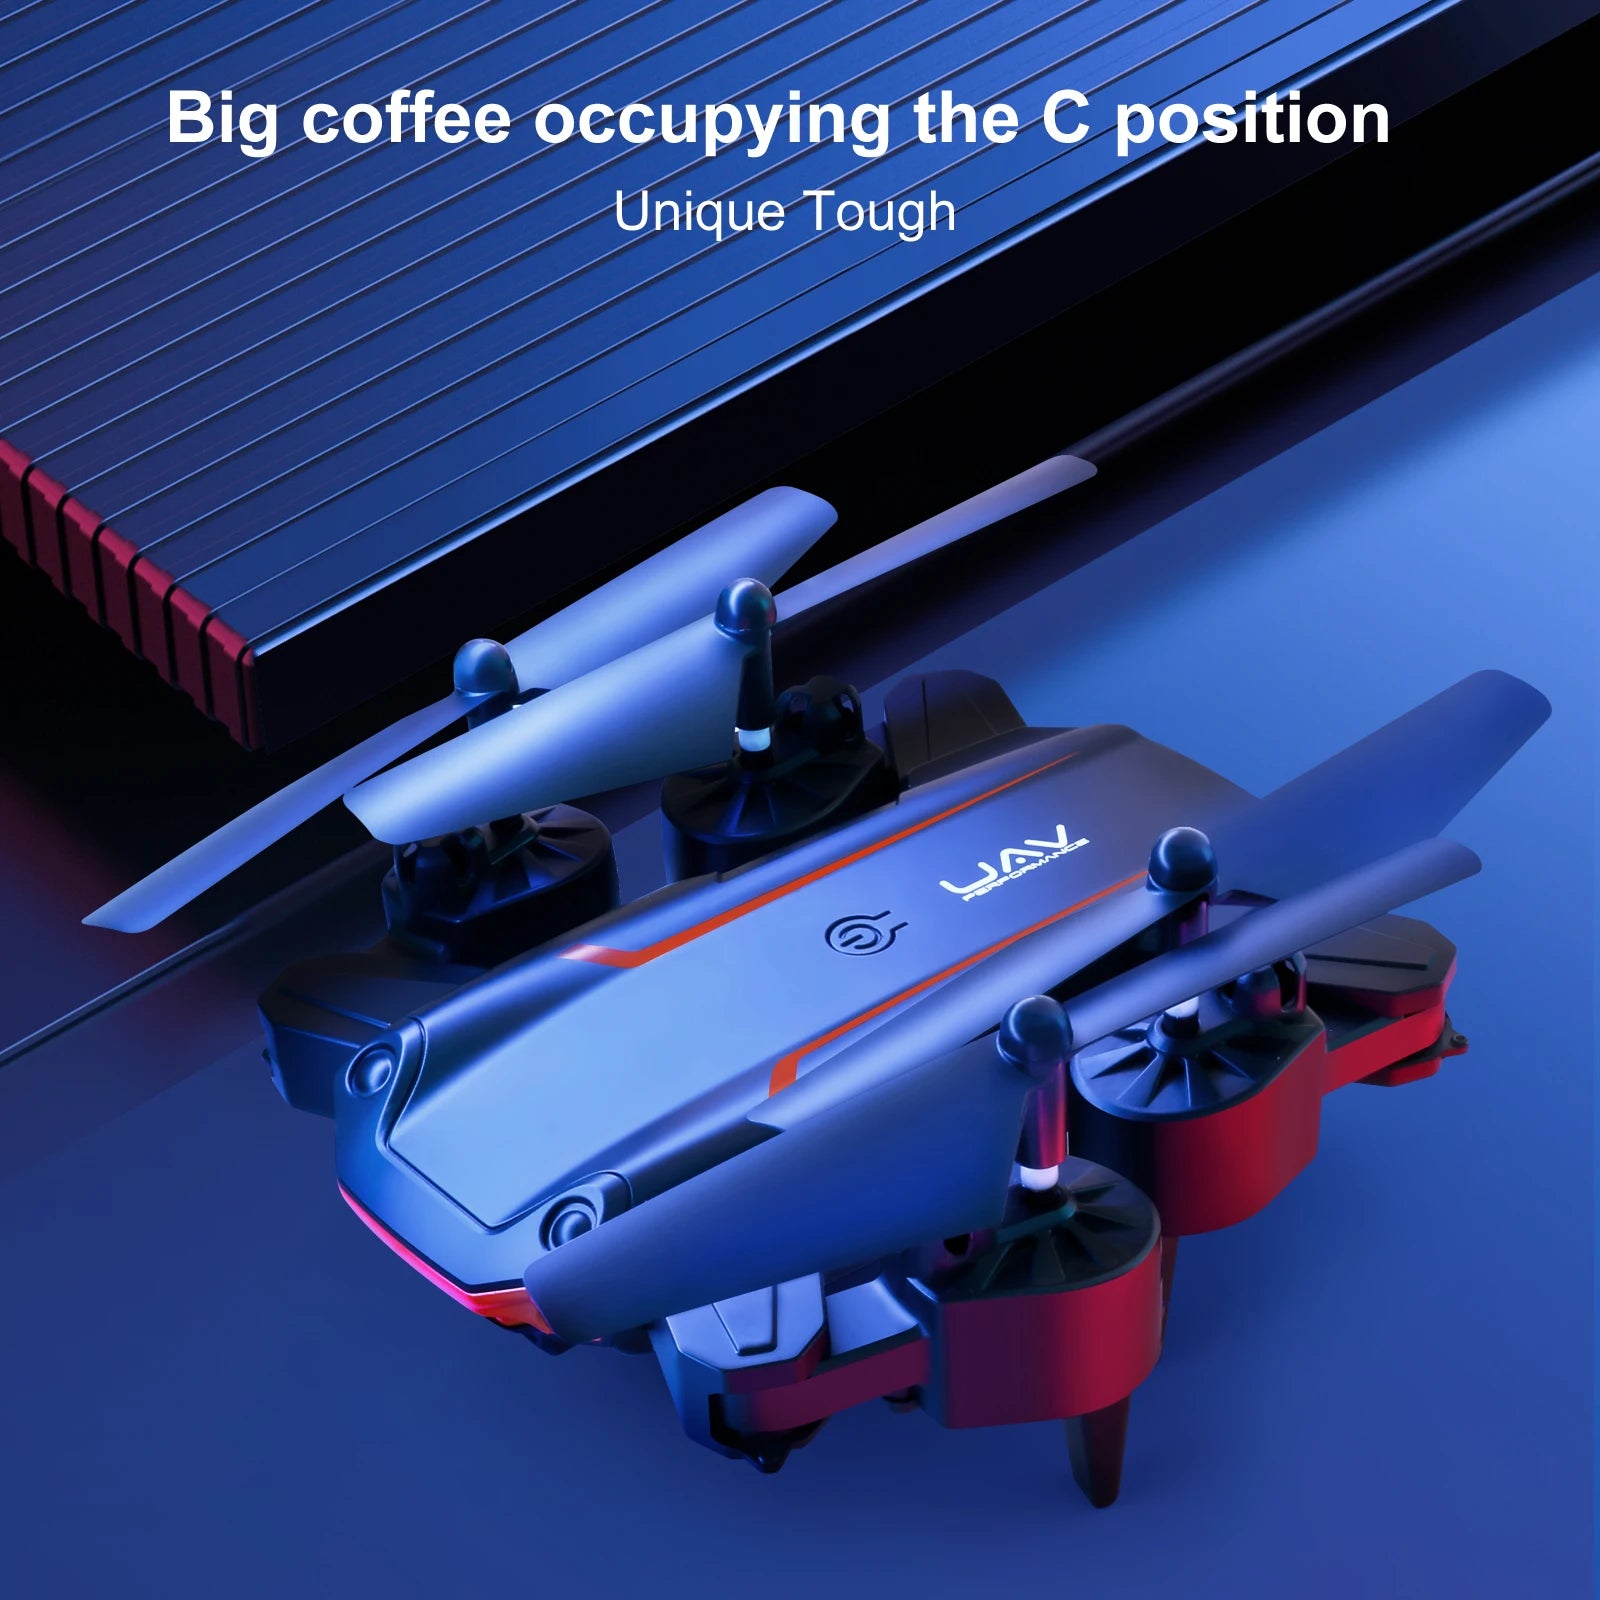 XYRC New KY603 Mini Drone, big coffee occupying the c position unique tough y